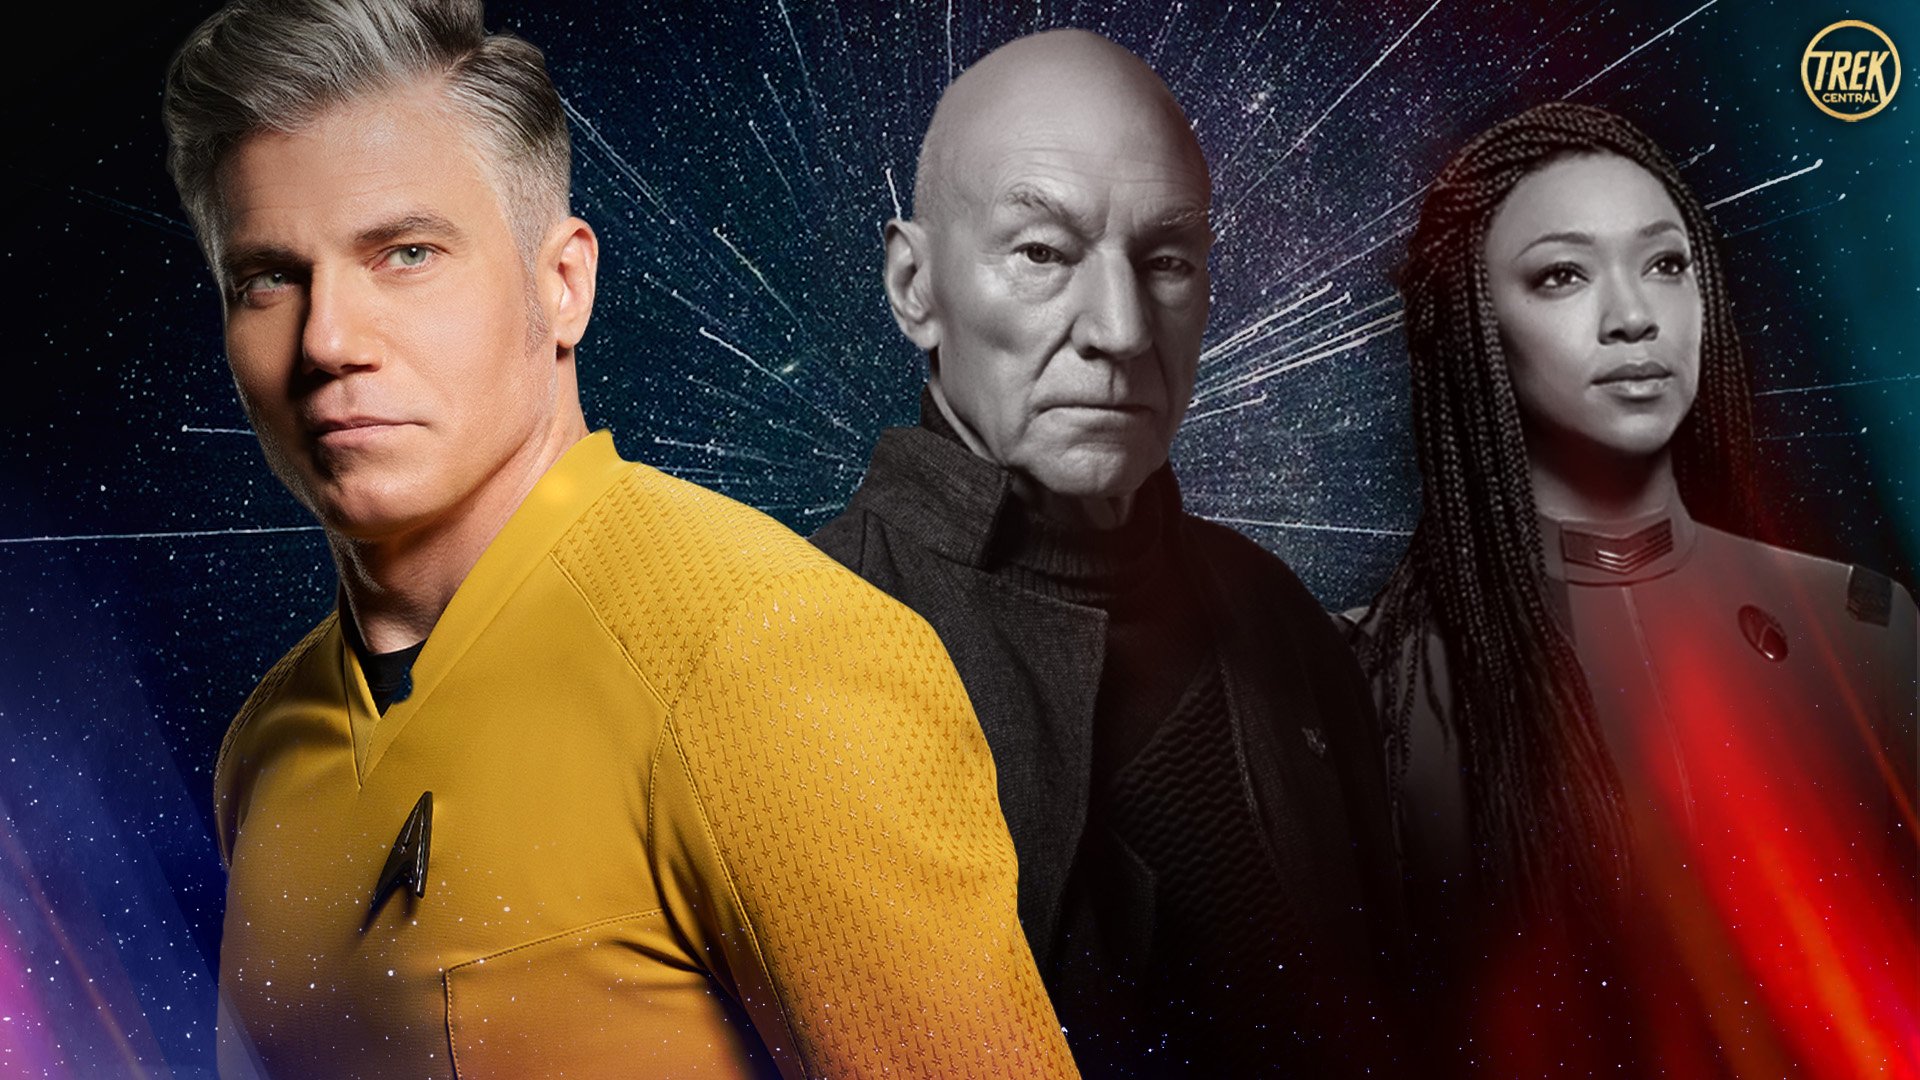 SDCC 2022: First Look Character Posters for Star Trek: Picard